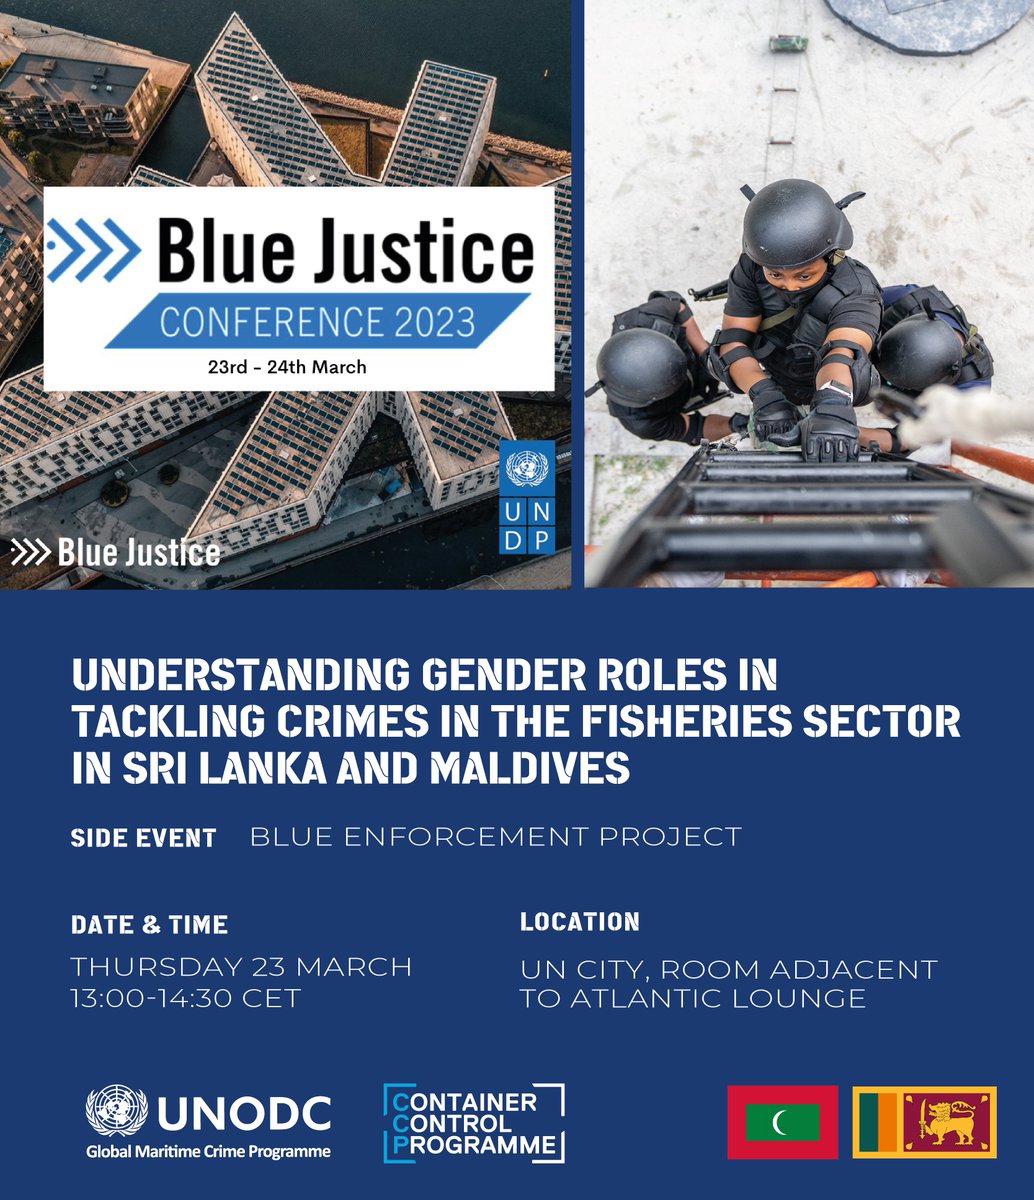 CCP and @UNODC_MCP are excited to announce a side event on the #BlueEnforcement Project and the role of #gender in tackling #crimesinfisheries in Maldives 🇲🇻 and Sri Lanka 🇱🇰

Join us at the @_BlueJustice conference in Copenhagen 23/03 @ 13:00-14:30 CET